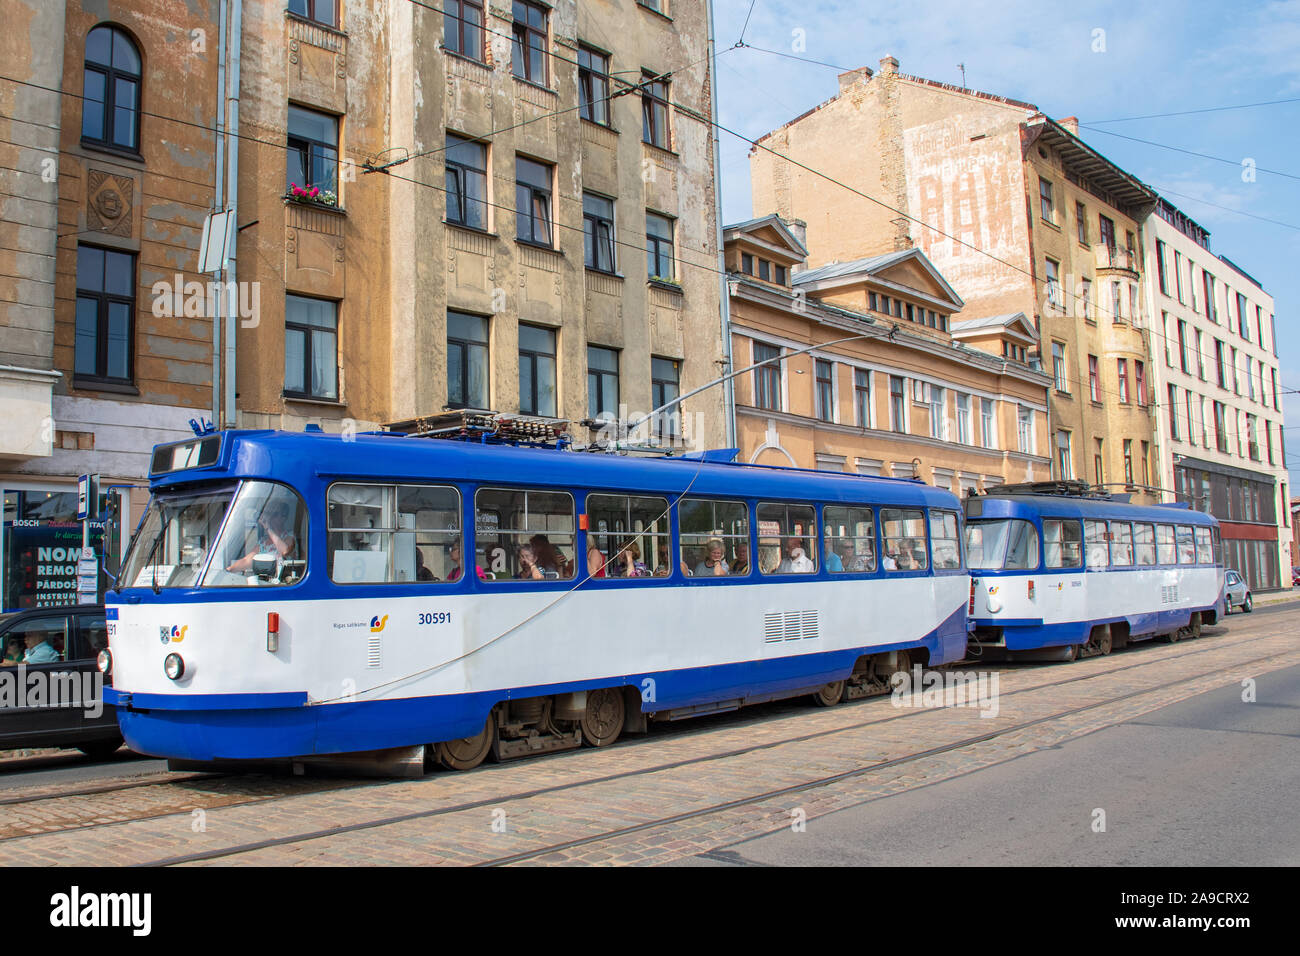 Soviet era in Riga, Latvia. Old buildings with Cyrillic writings, Soviet architecture with old trolley bus in Riga Stock Photo